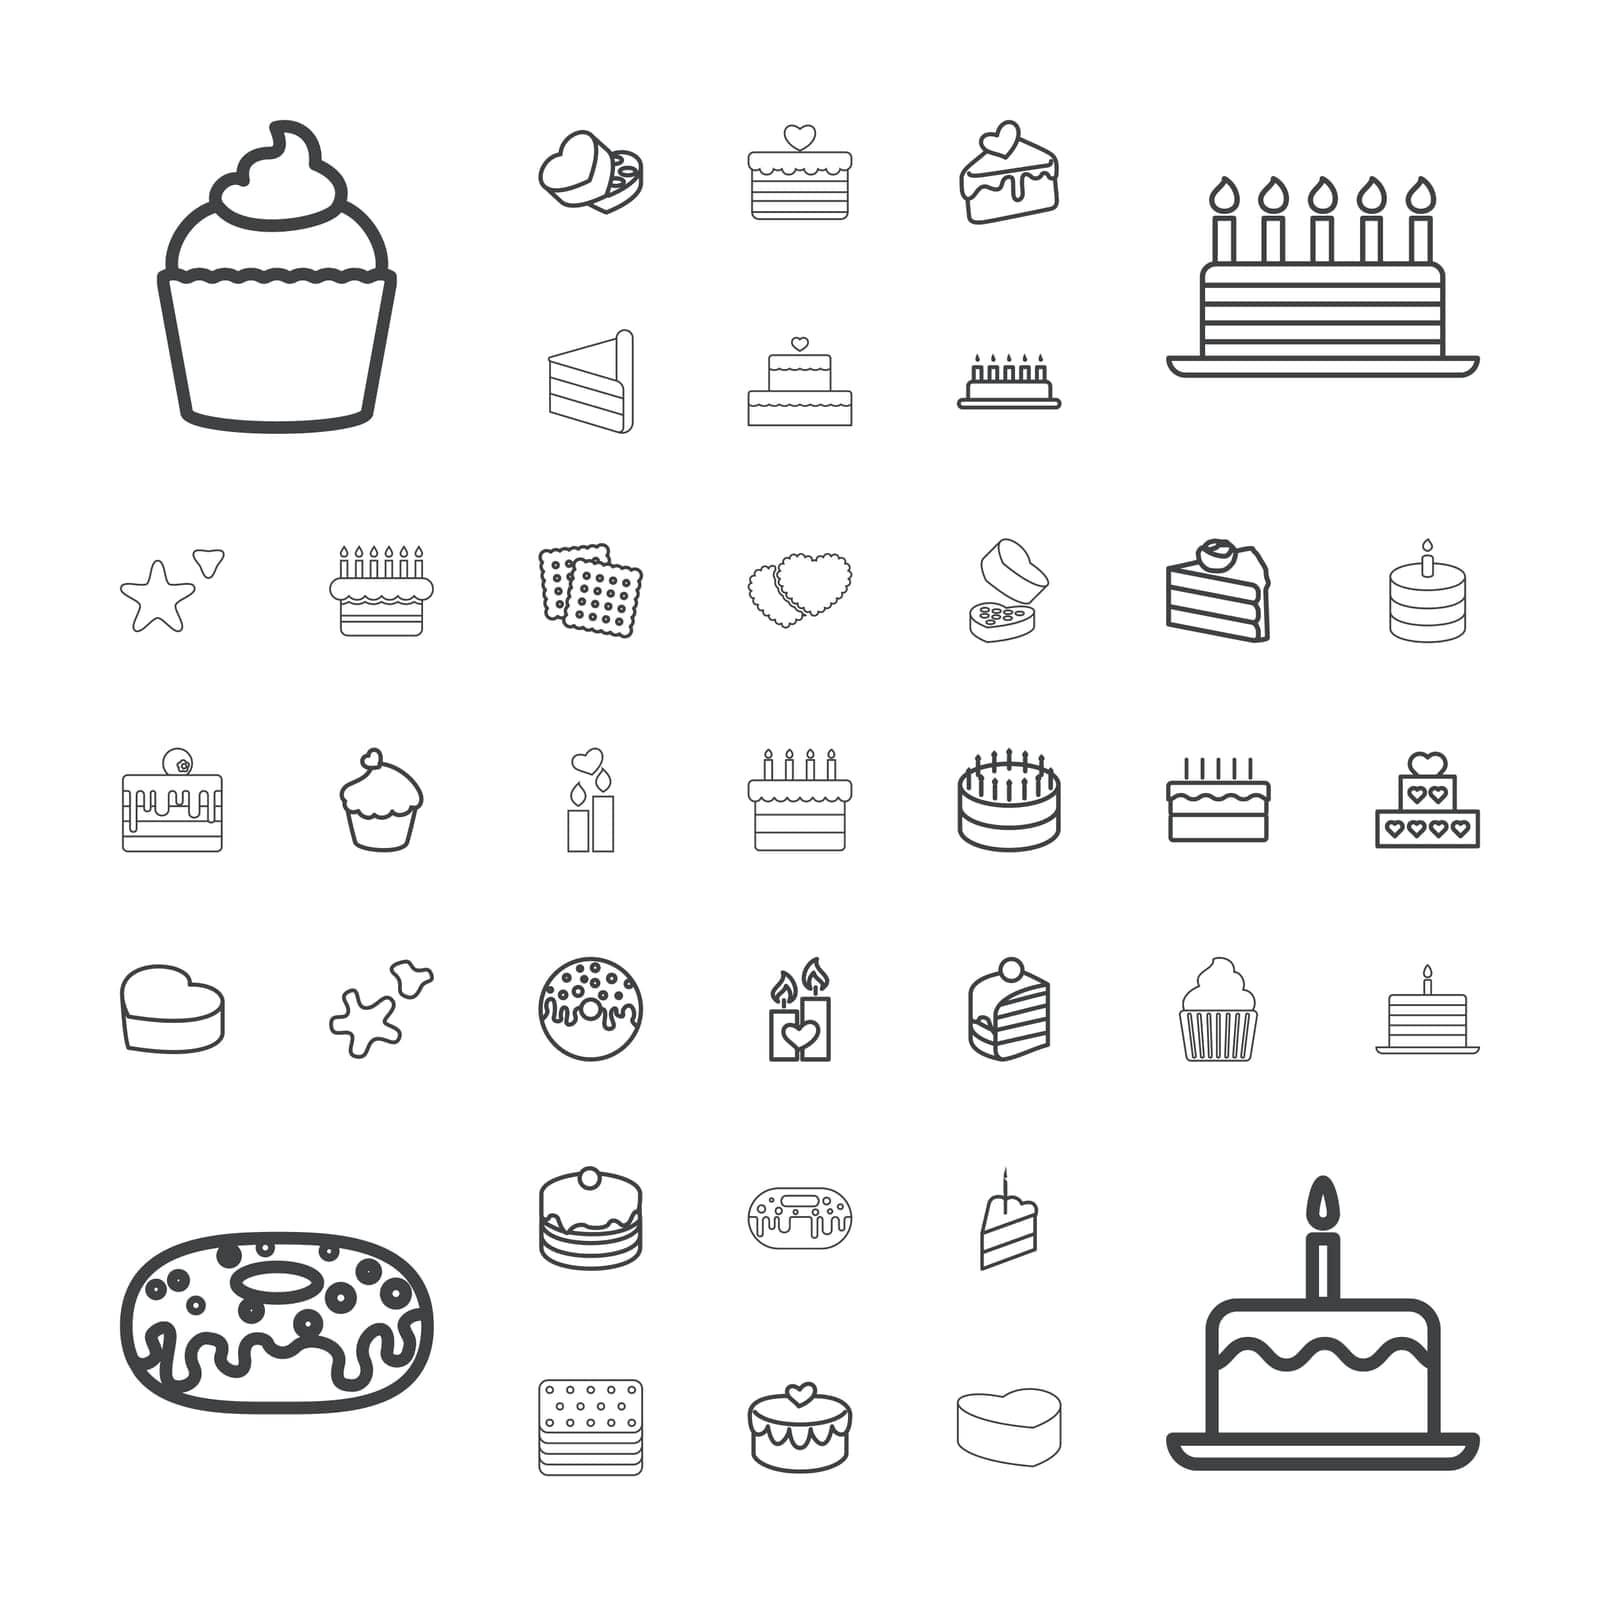 birthday,symbol,icon,sign,isolated,box,holiday,cookies,white,slice,cake,design,donut,of,lock,vector,decoration,graphic,set,cookie,bakery,one,delicious,muffin,food,heart,with,celebration,traditional,dessert,piece,background,candle,illustration,sweet,cupcake by ogqcorp